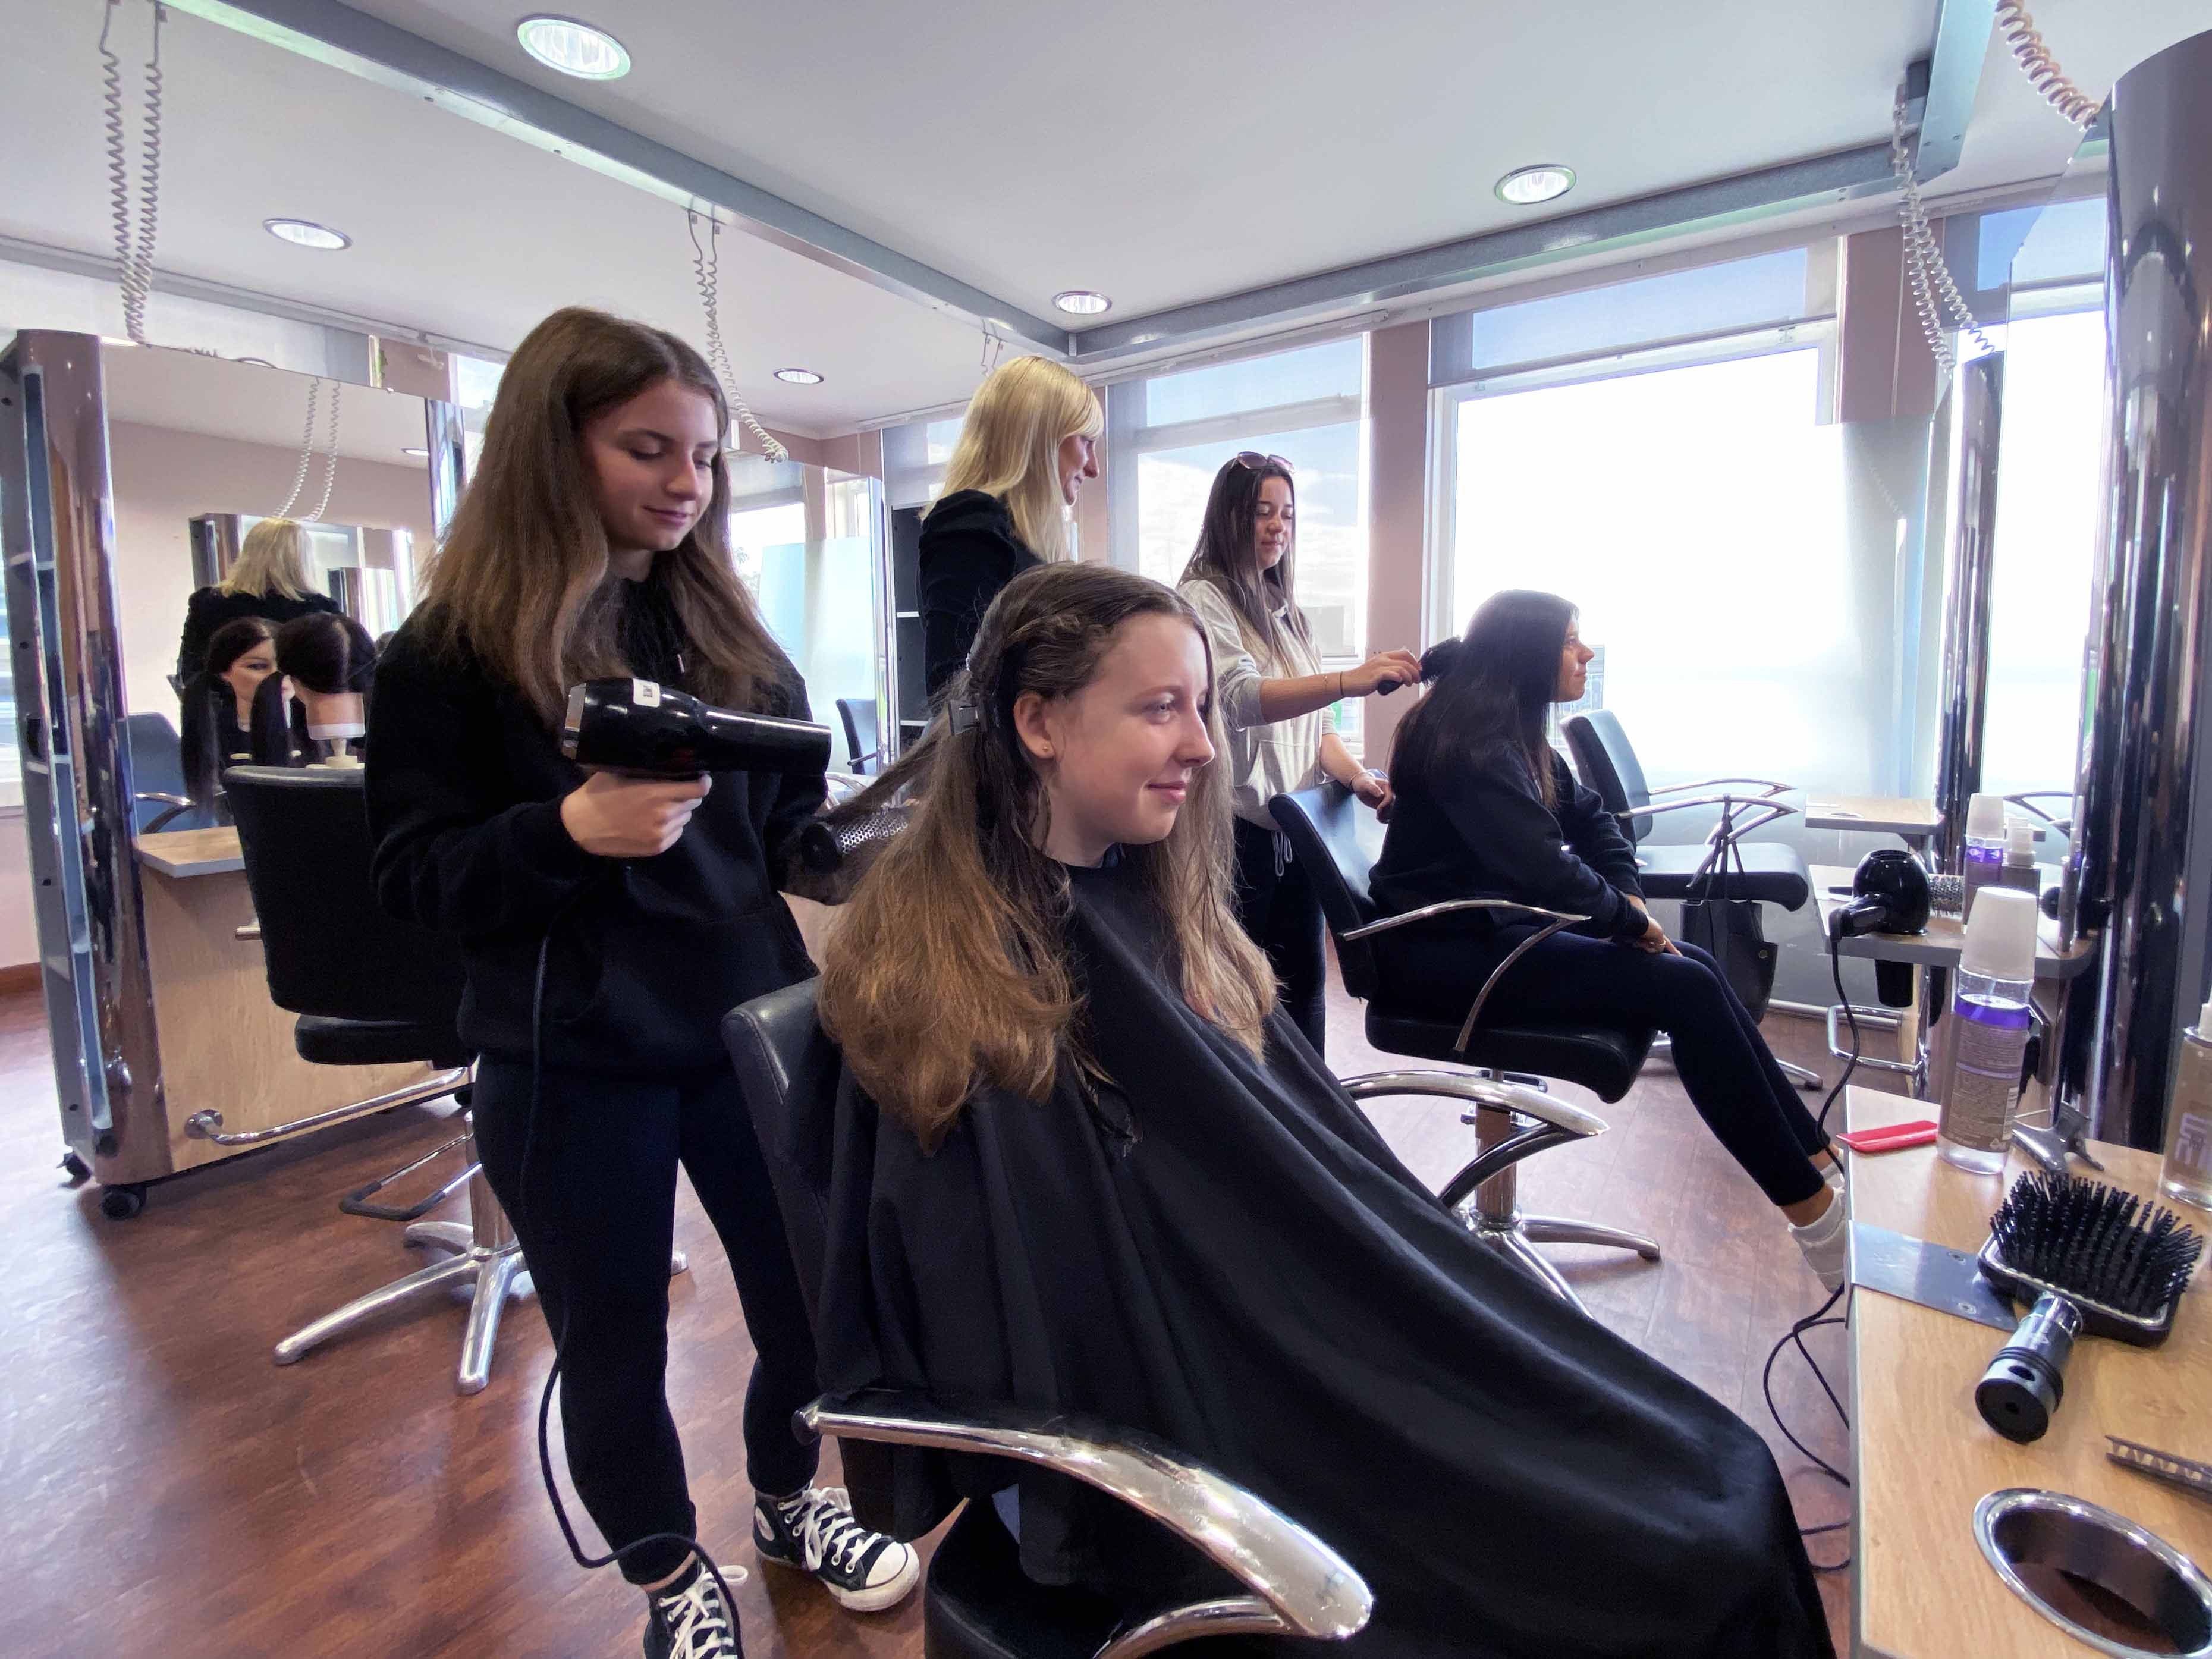 New salon opens up career opportunity for Blairgowrie High School pupils